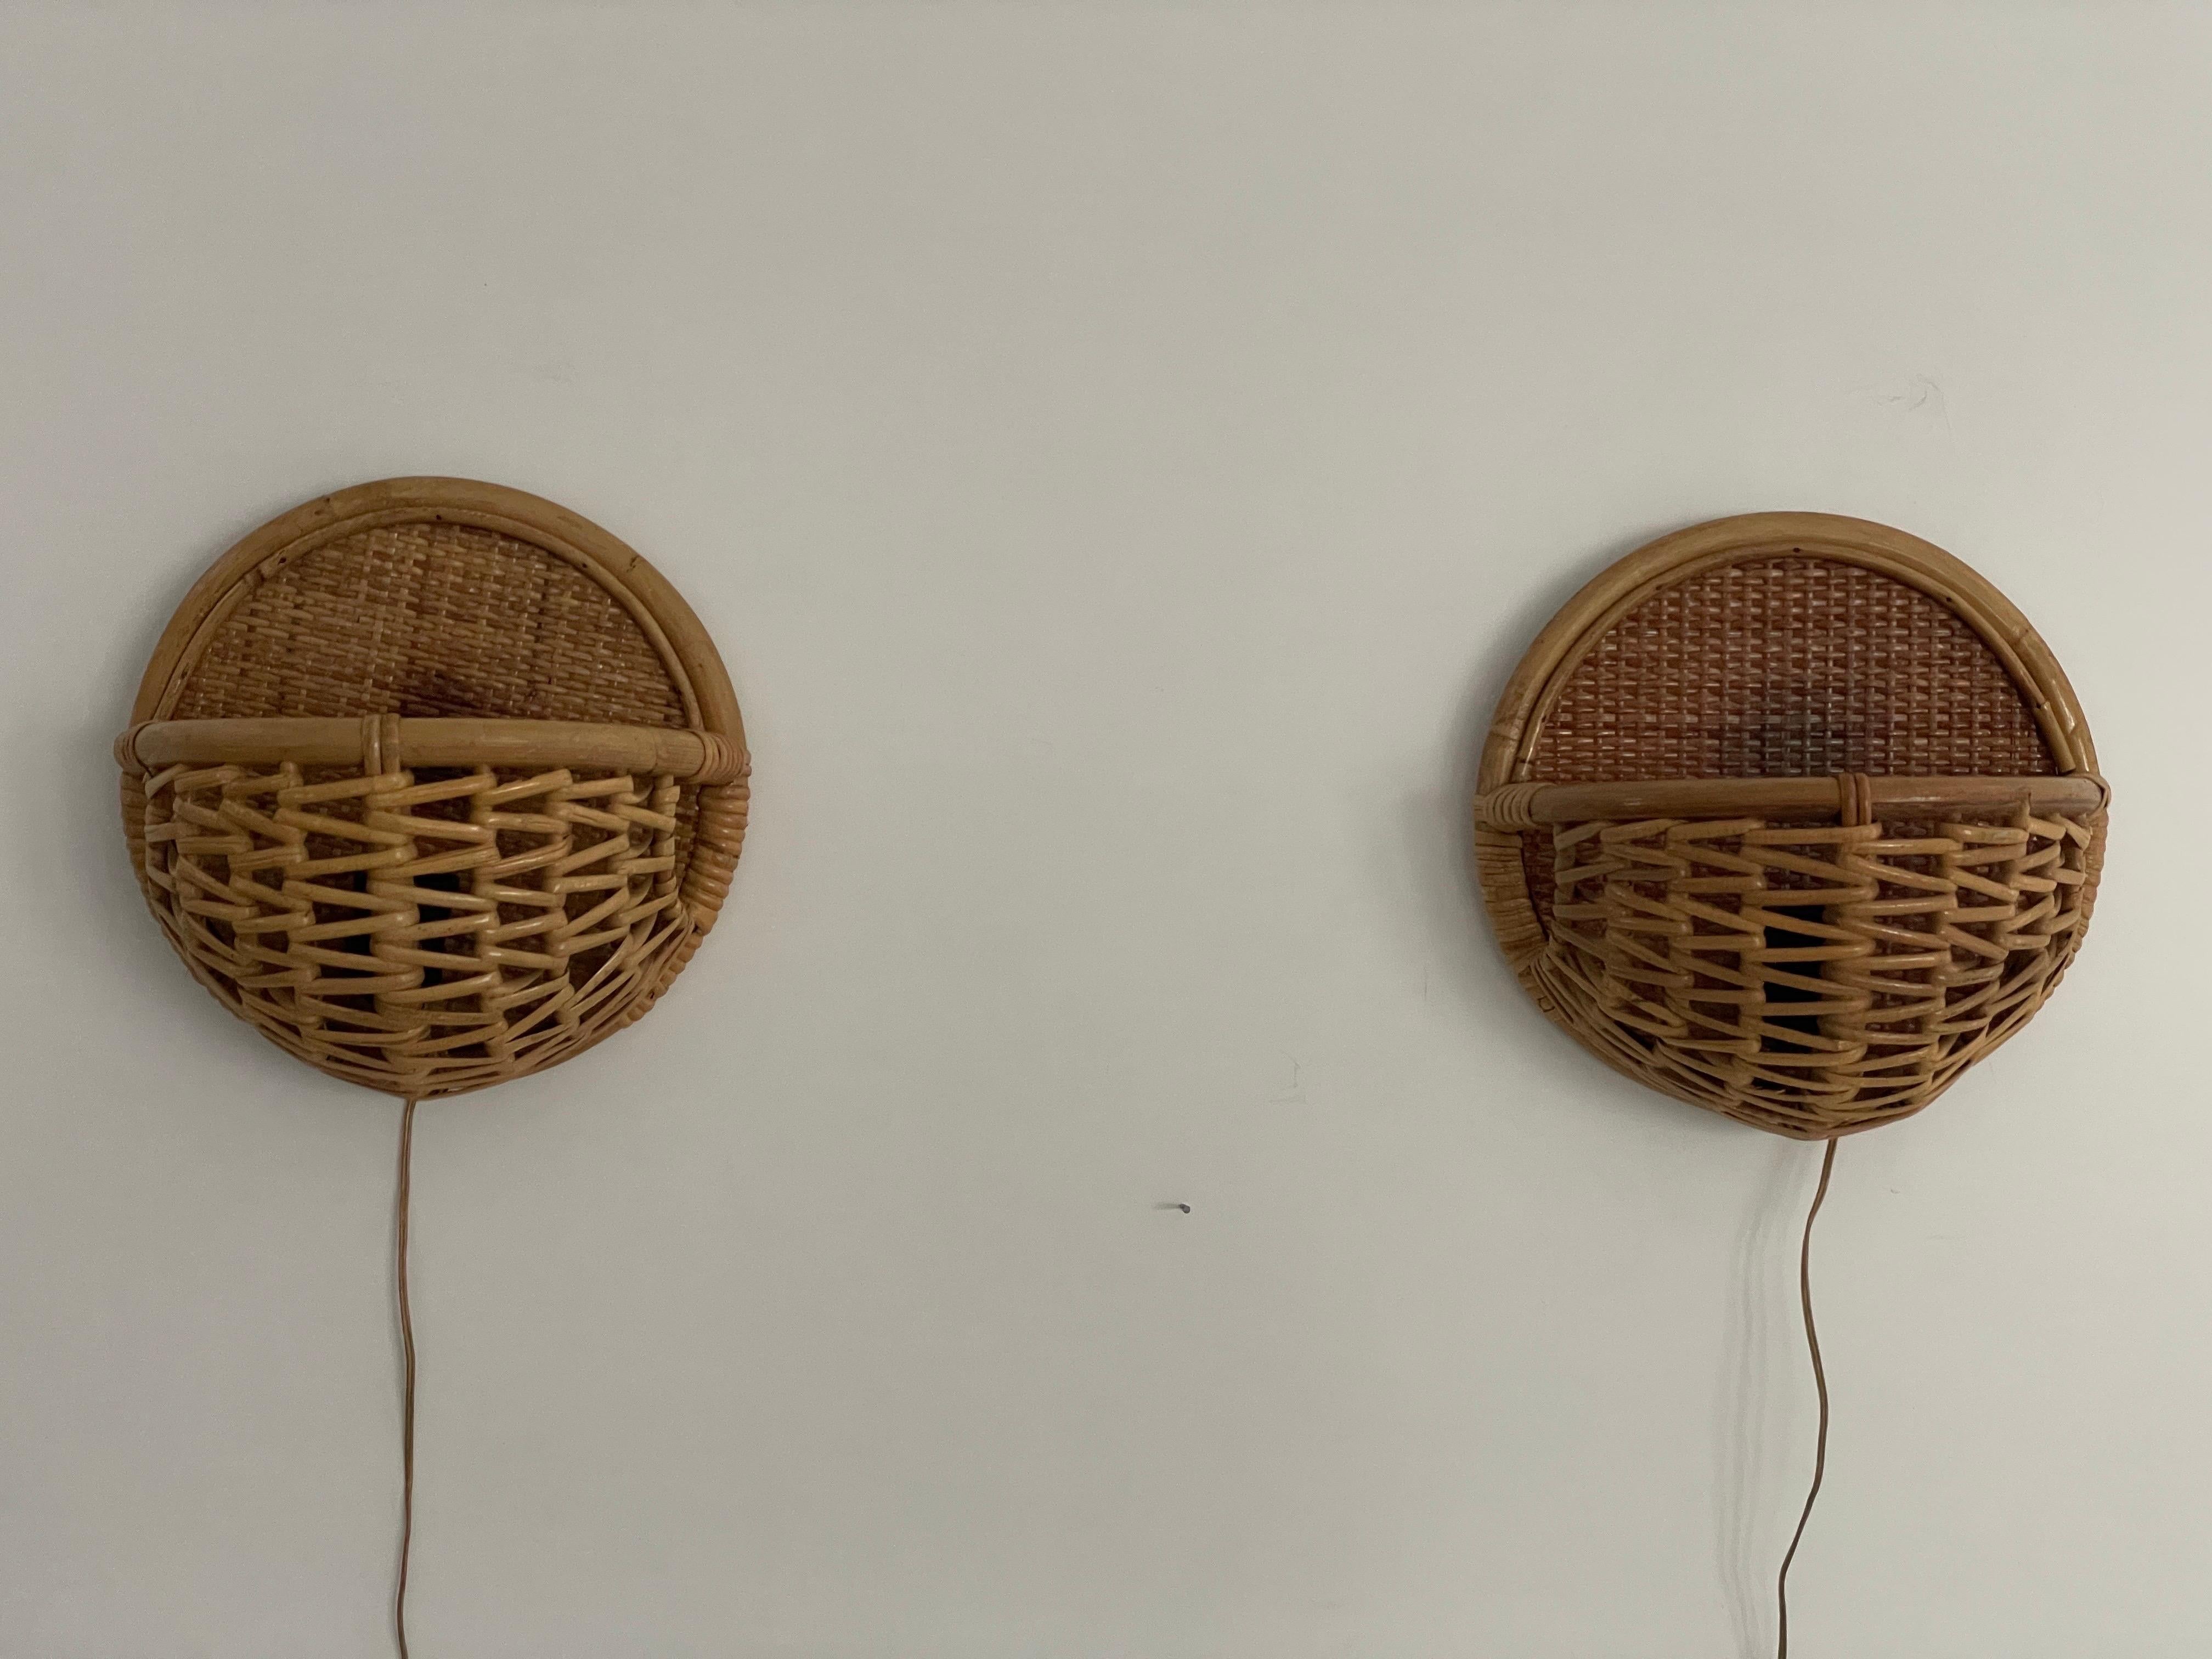 Wicker and Bamboo Round Design Pair of Wall Lamps, 1950s, Italy

Very elegant and Minimalist wall lamps
Lamp is in very good condition.

These lamps are plug-in but they can be easily converted to hardwired. We will do this conversion if you